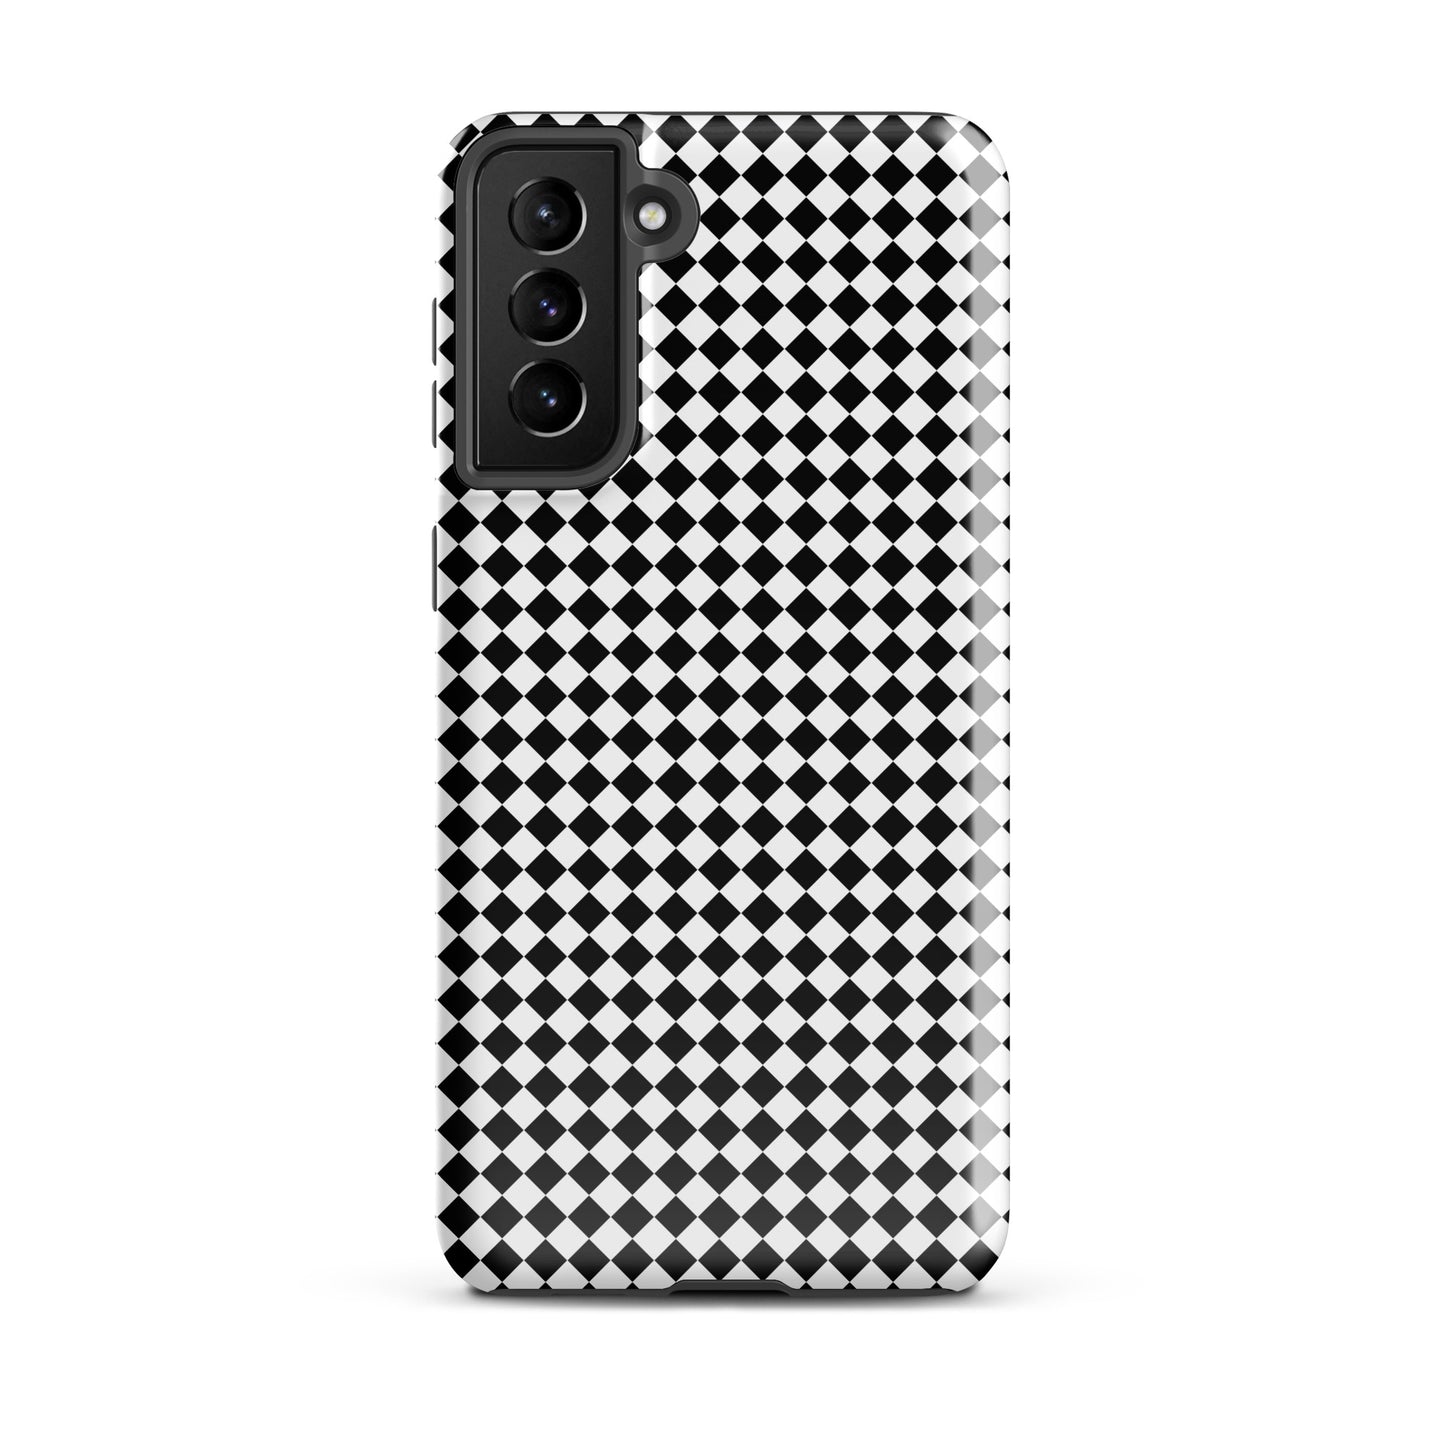 Tough case for Samsung with a print of a chessboard